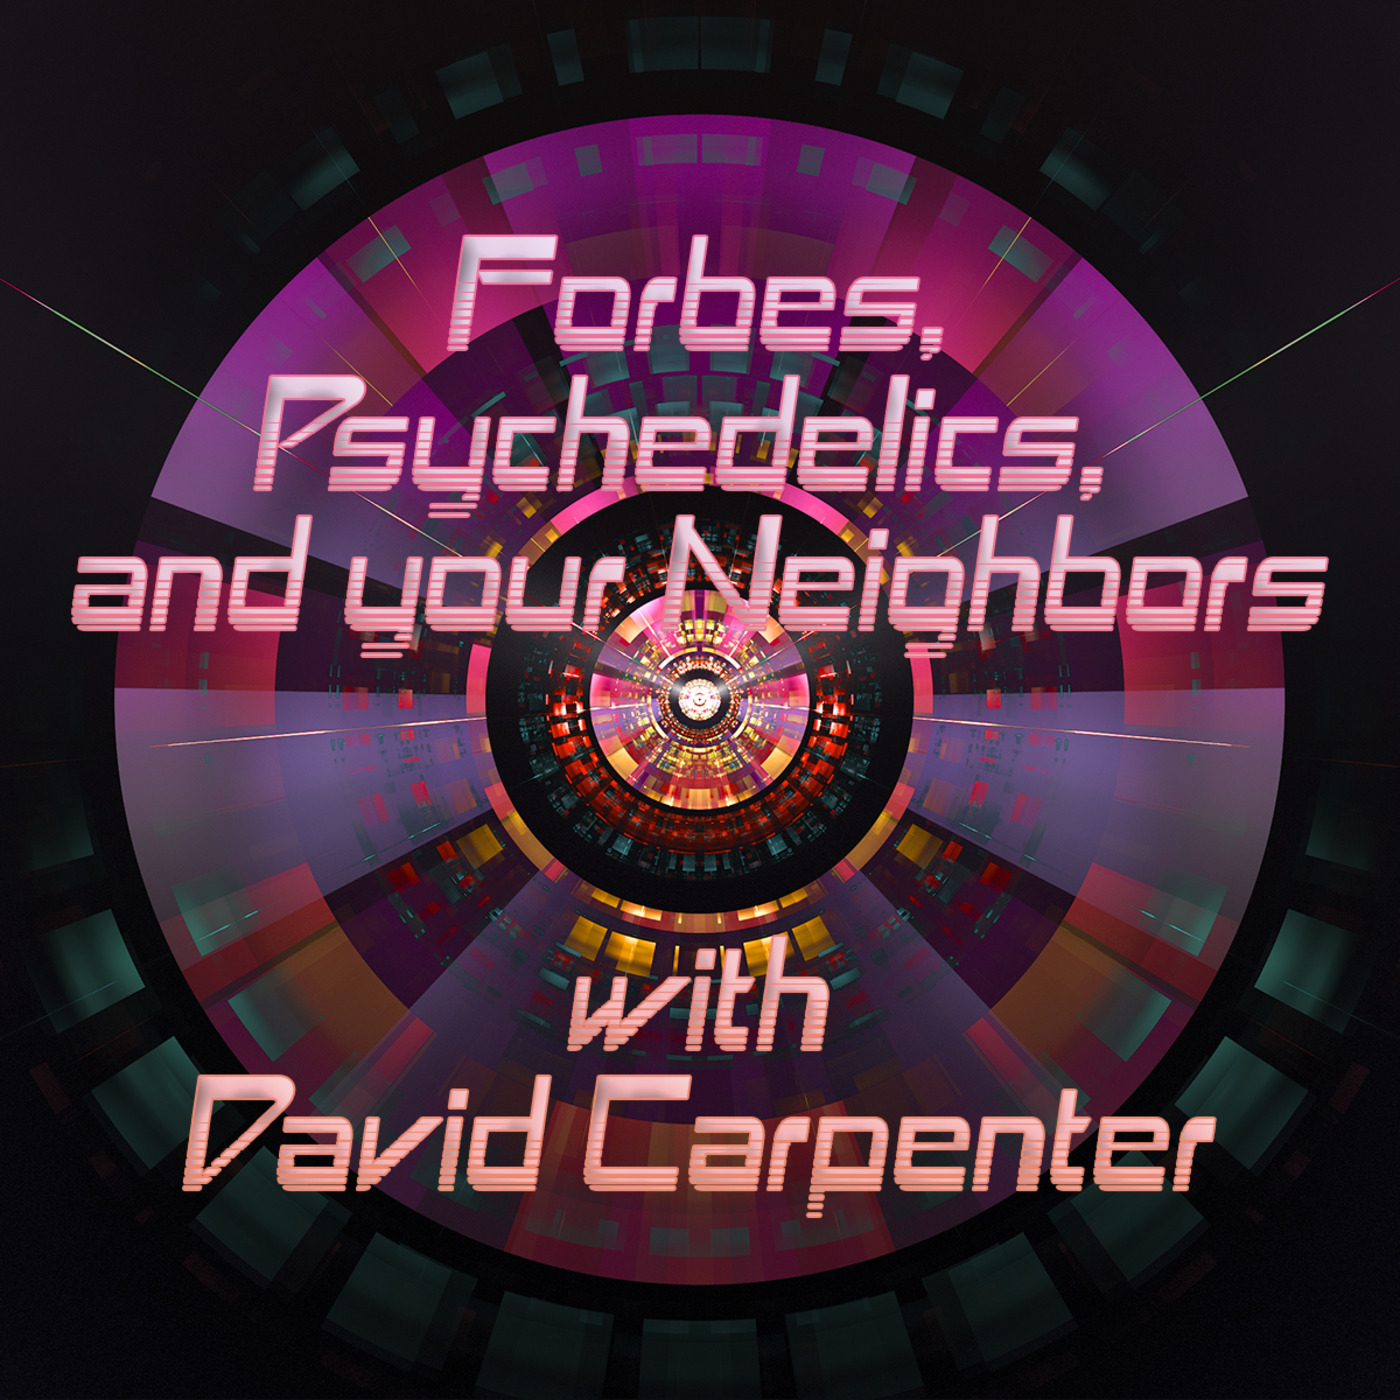 Episode 144: Forbes, Psychedelics, and Your Neighbors, with David Carpenter